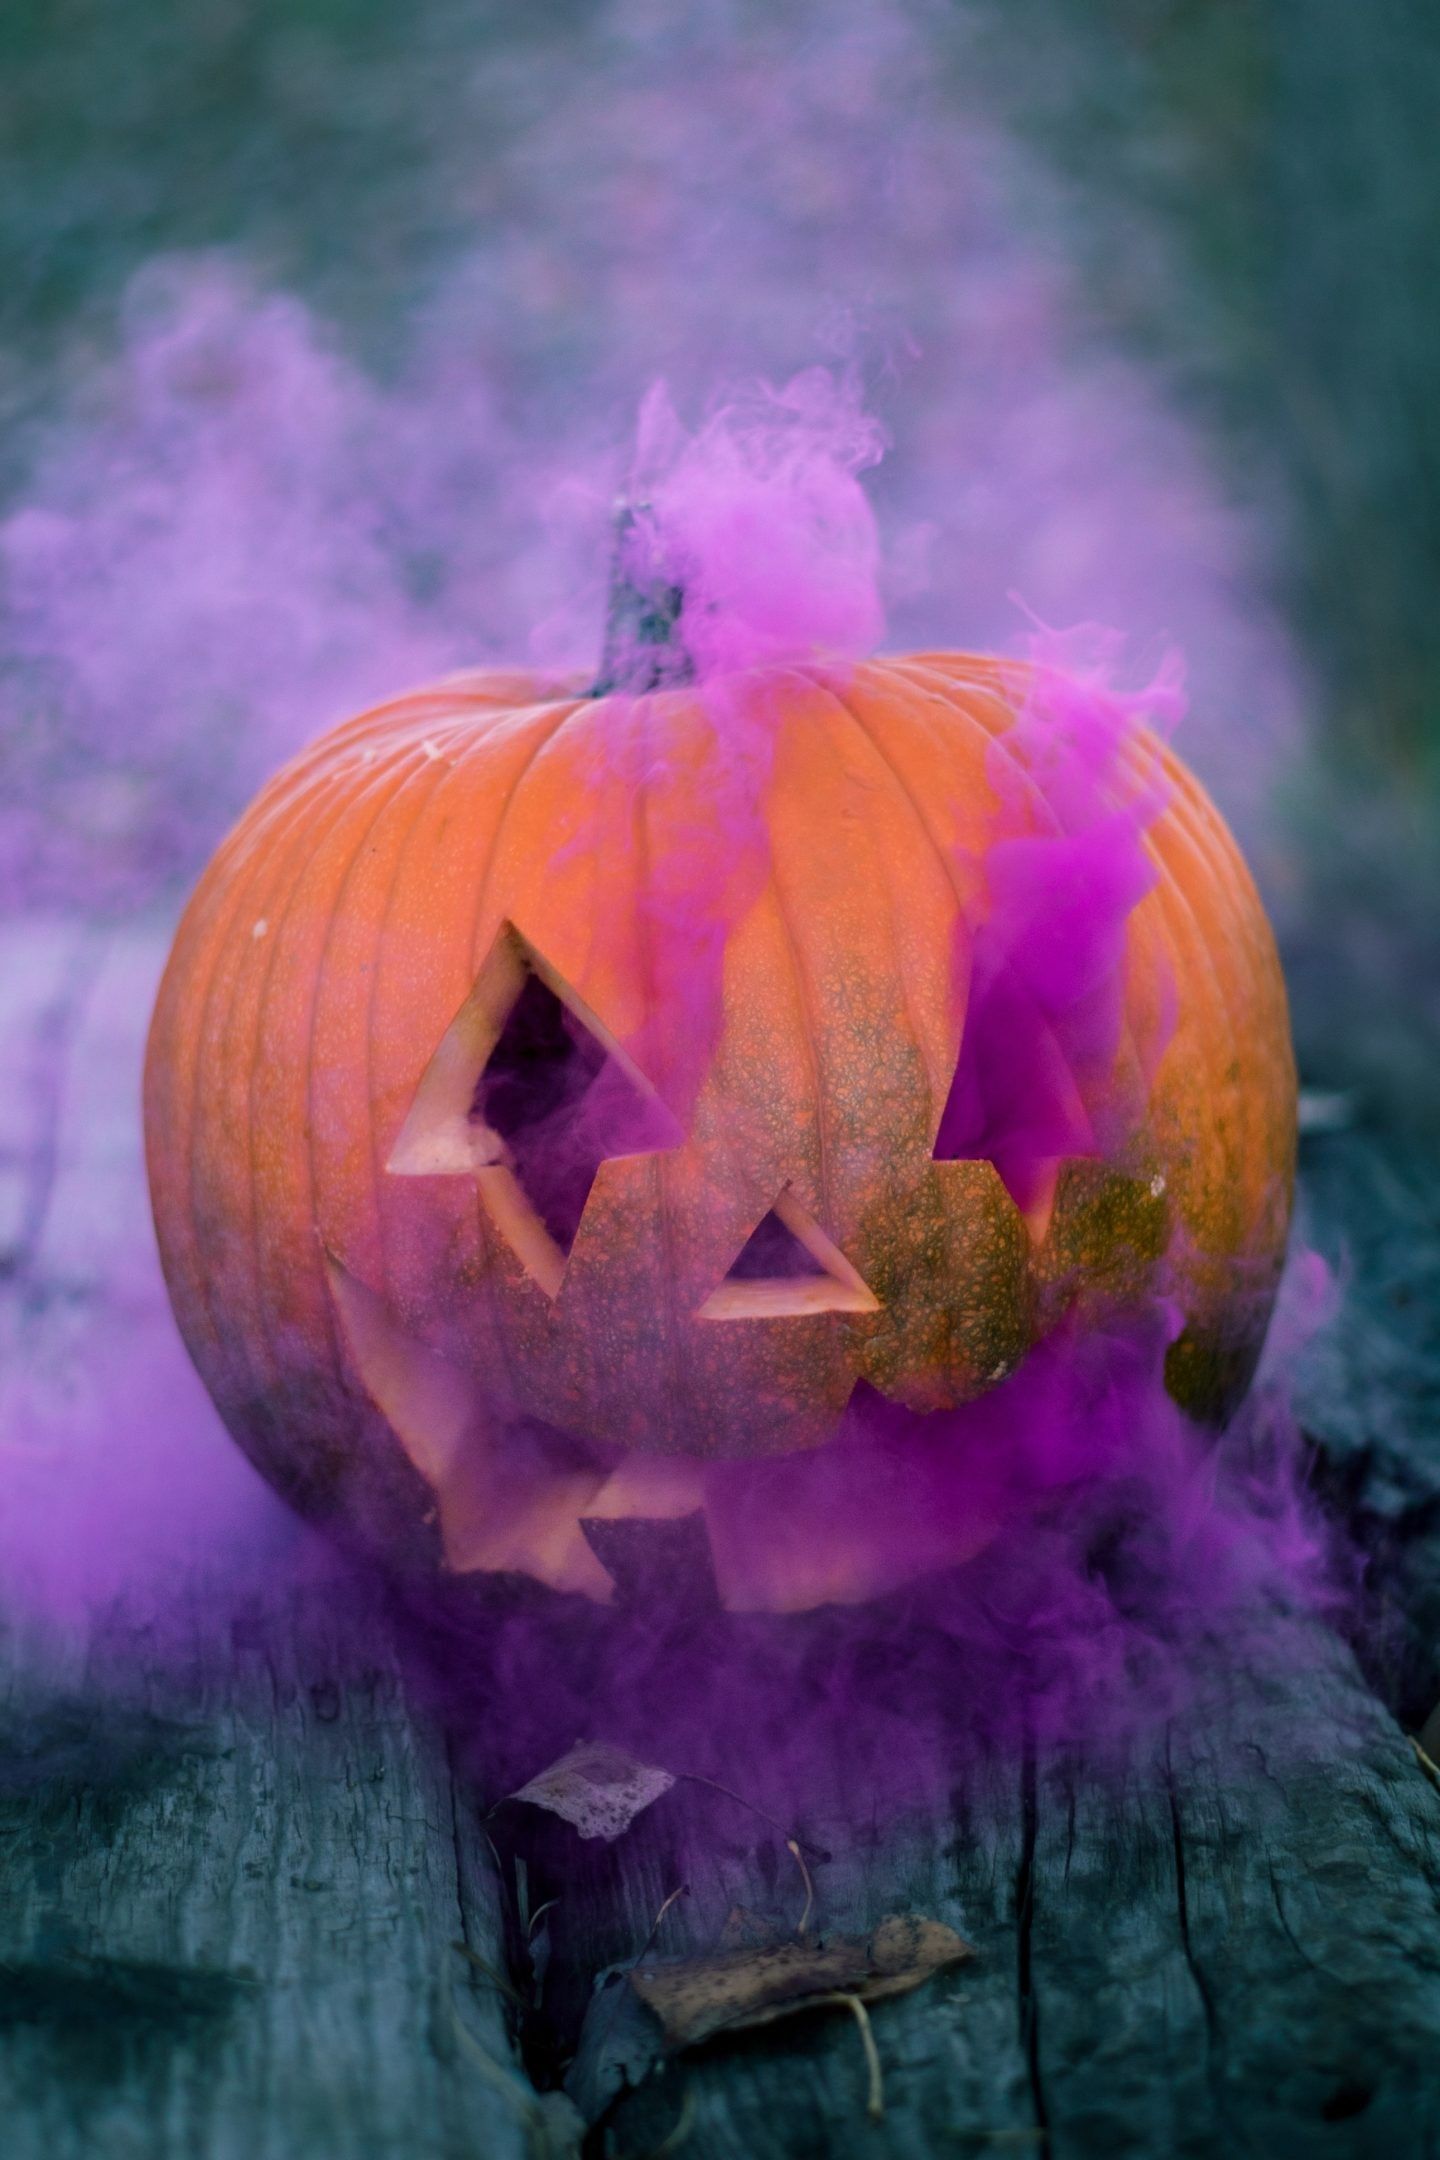 A pumpkin with a carved face on it sitting on a wooden log with purple smoke coming out of it. - Pumpkin, Halloween, cute Halloween